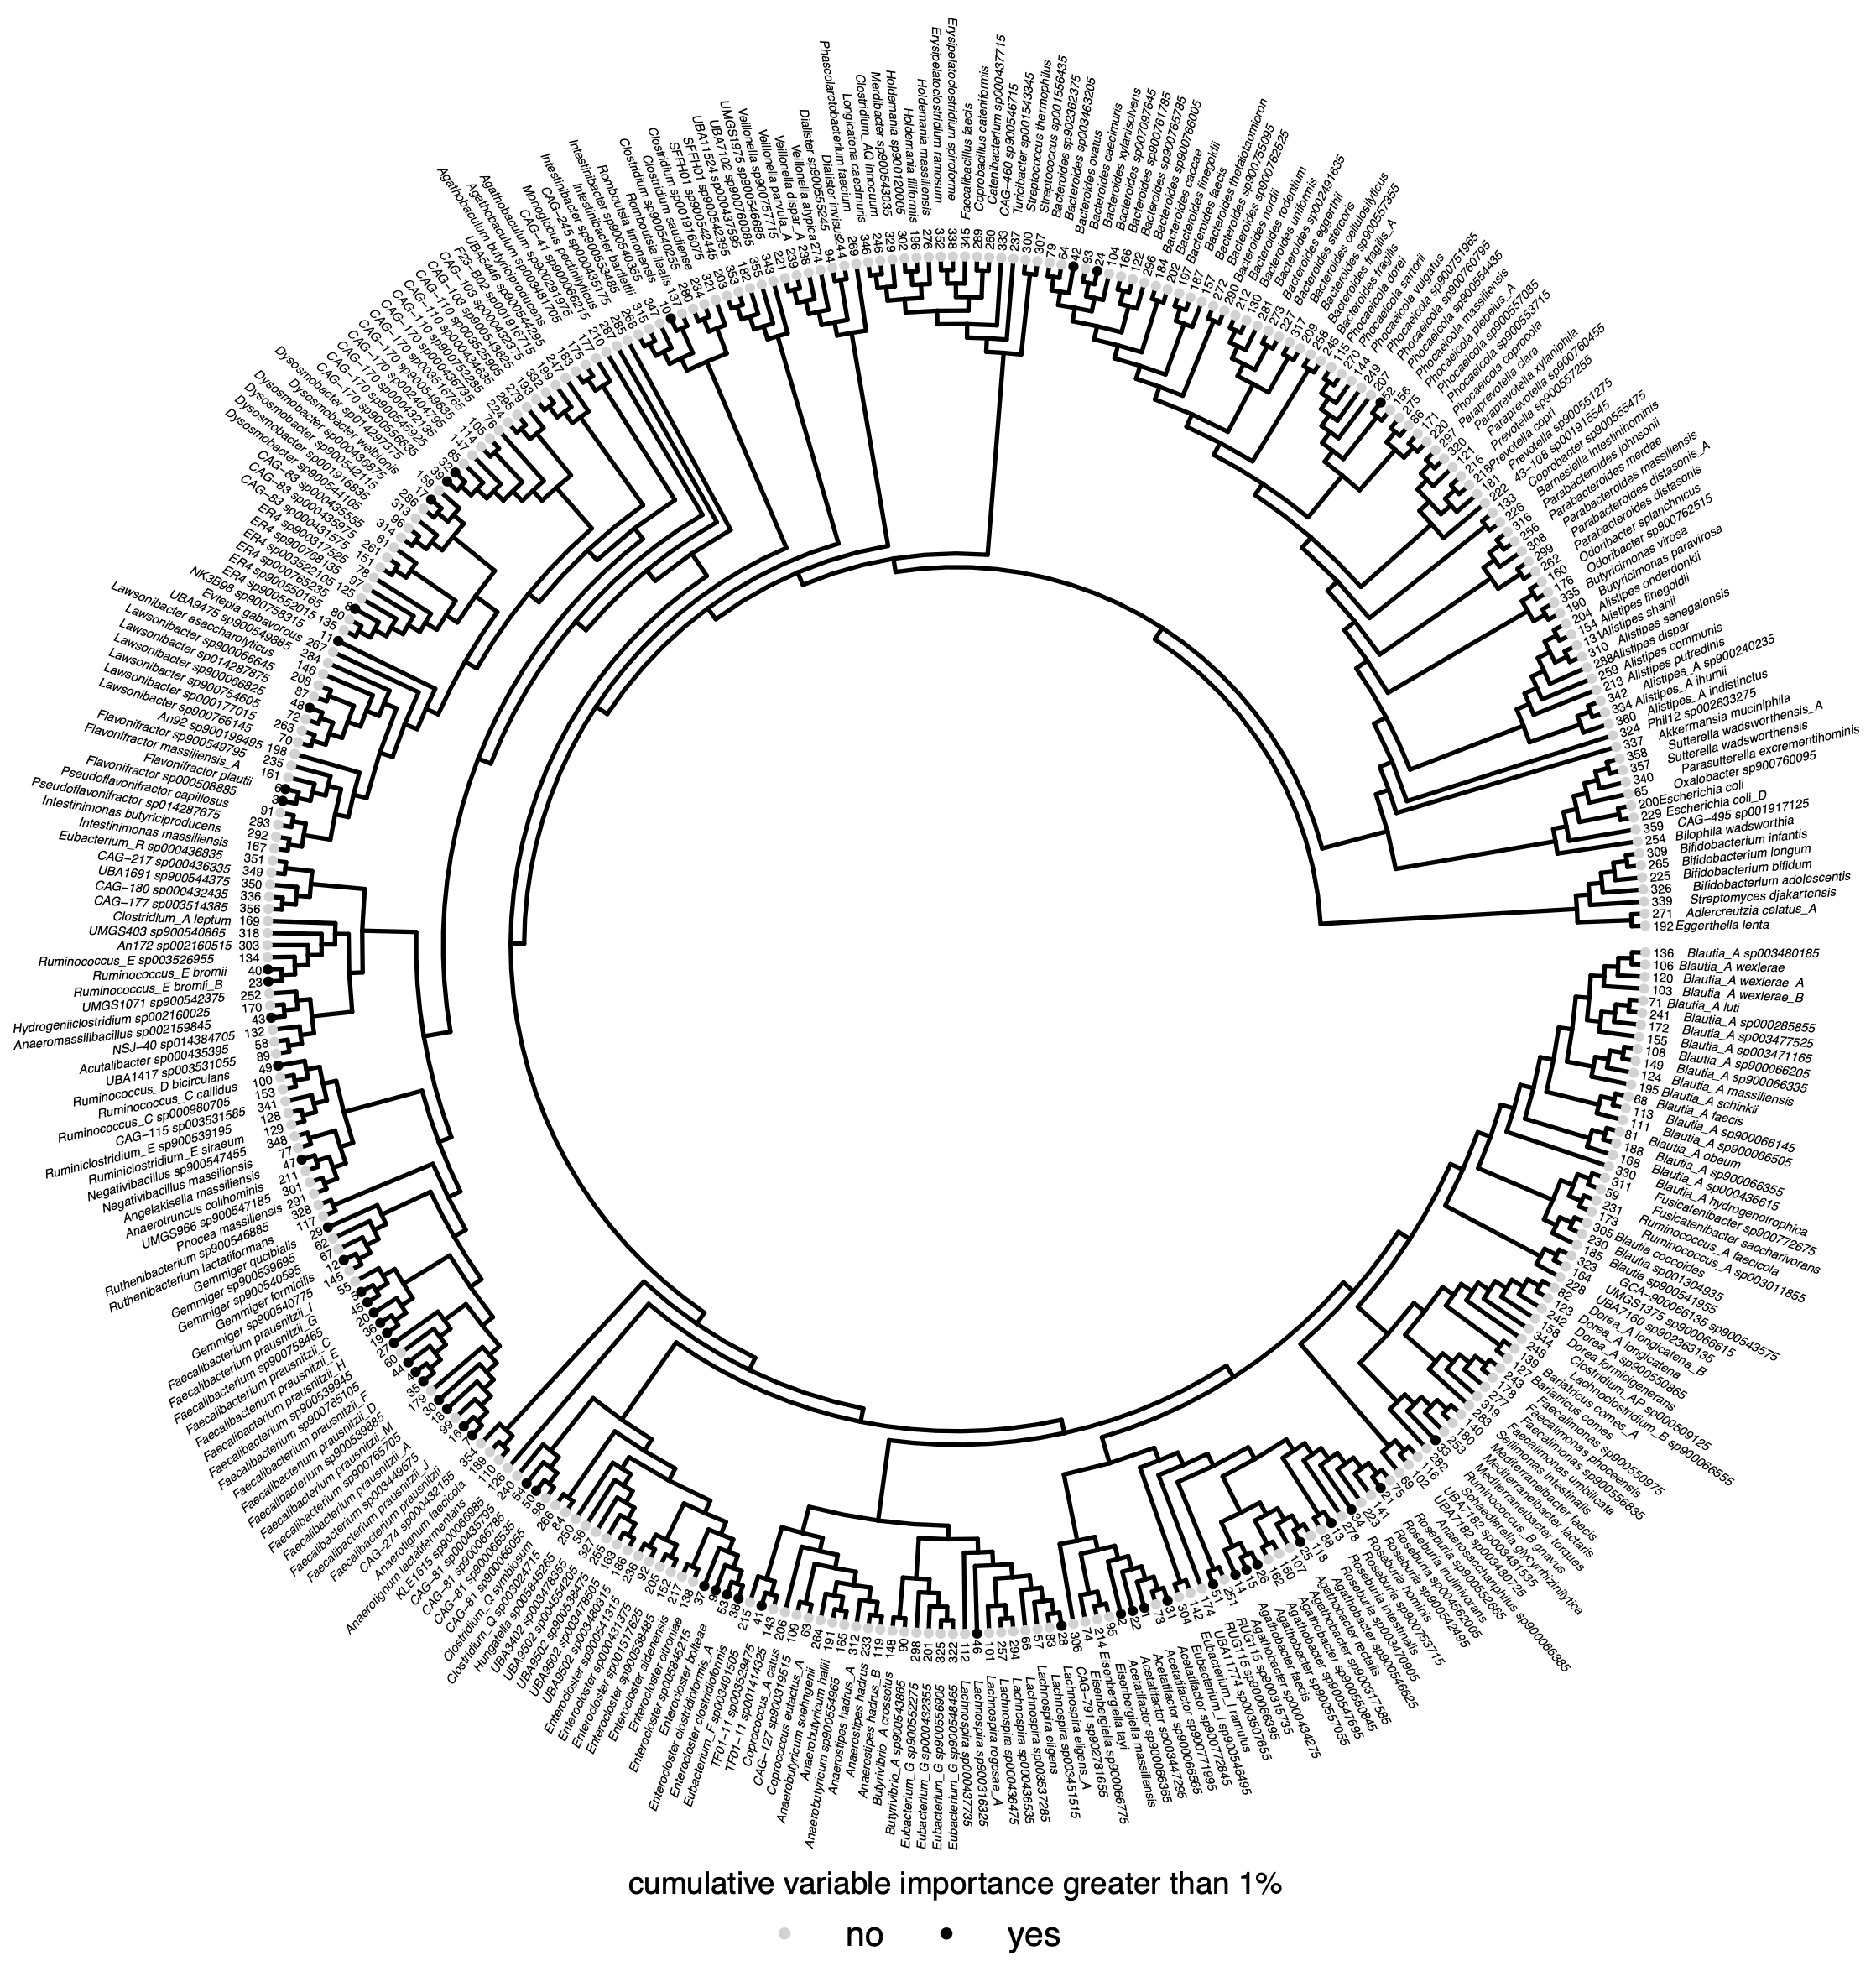 Figure S1: Phylogenetic tree of 360 bacterial species that were predictive of IBD subtype in all models. Tree was built from the GTDB rs202 tree with all tips except those represented by the 360 genomes removed. Tree tips are labelled by genomes that anchored at least 1% of the normalized variable importance. The inner ring annotates the rank of the genomes, with the genome holding the most normalized variable importance across models ranked as 1. The outer ring is the species name within the GTDB database.